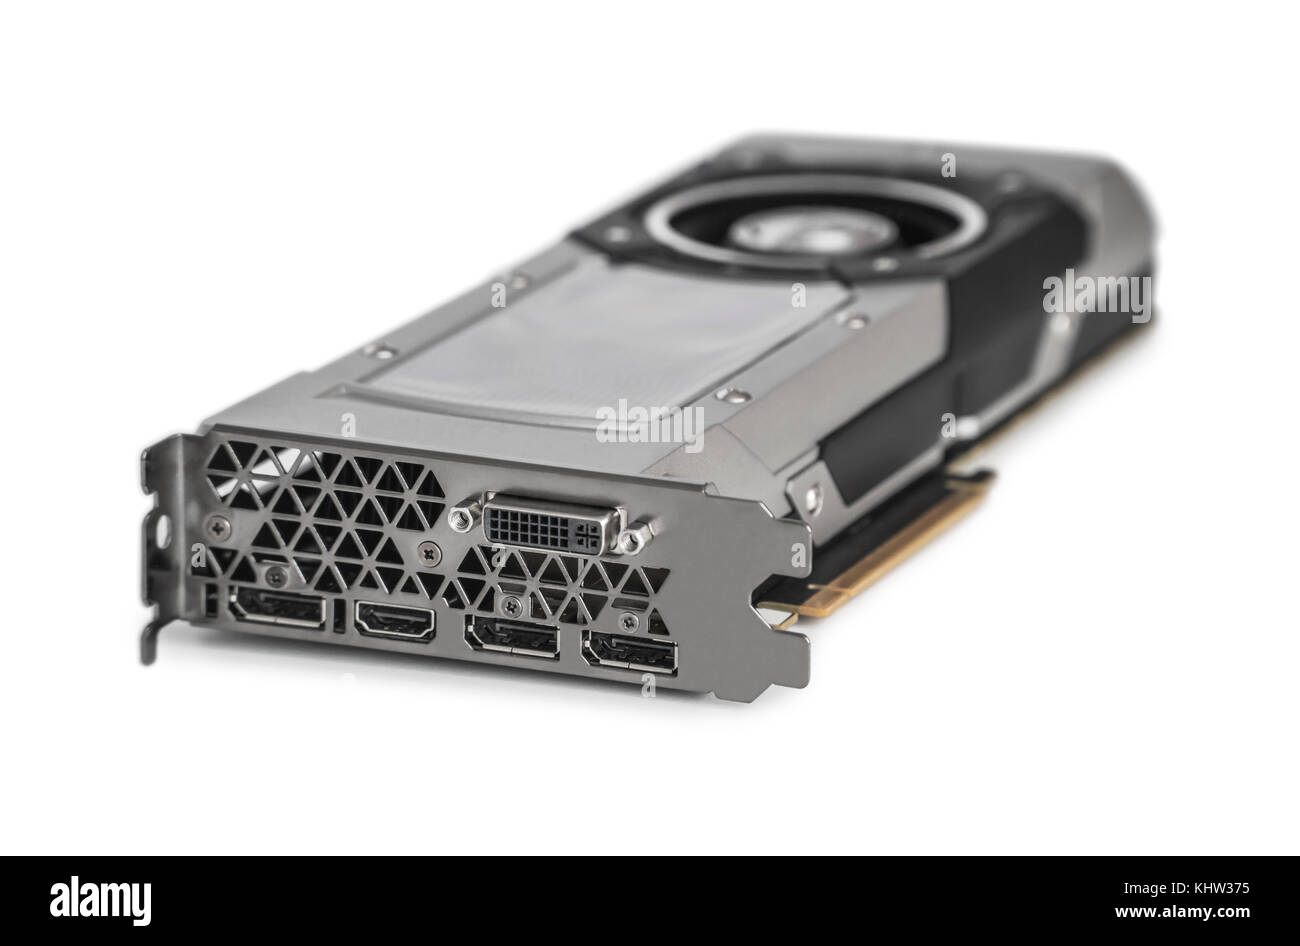 Video Graphics card with powerful GPU isolated on white background. Might  be used to mine cryptocurrencies. Closeup photo with shallow depth of field  Stock Photo - Alamy